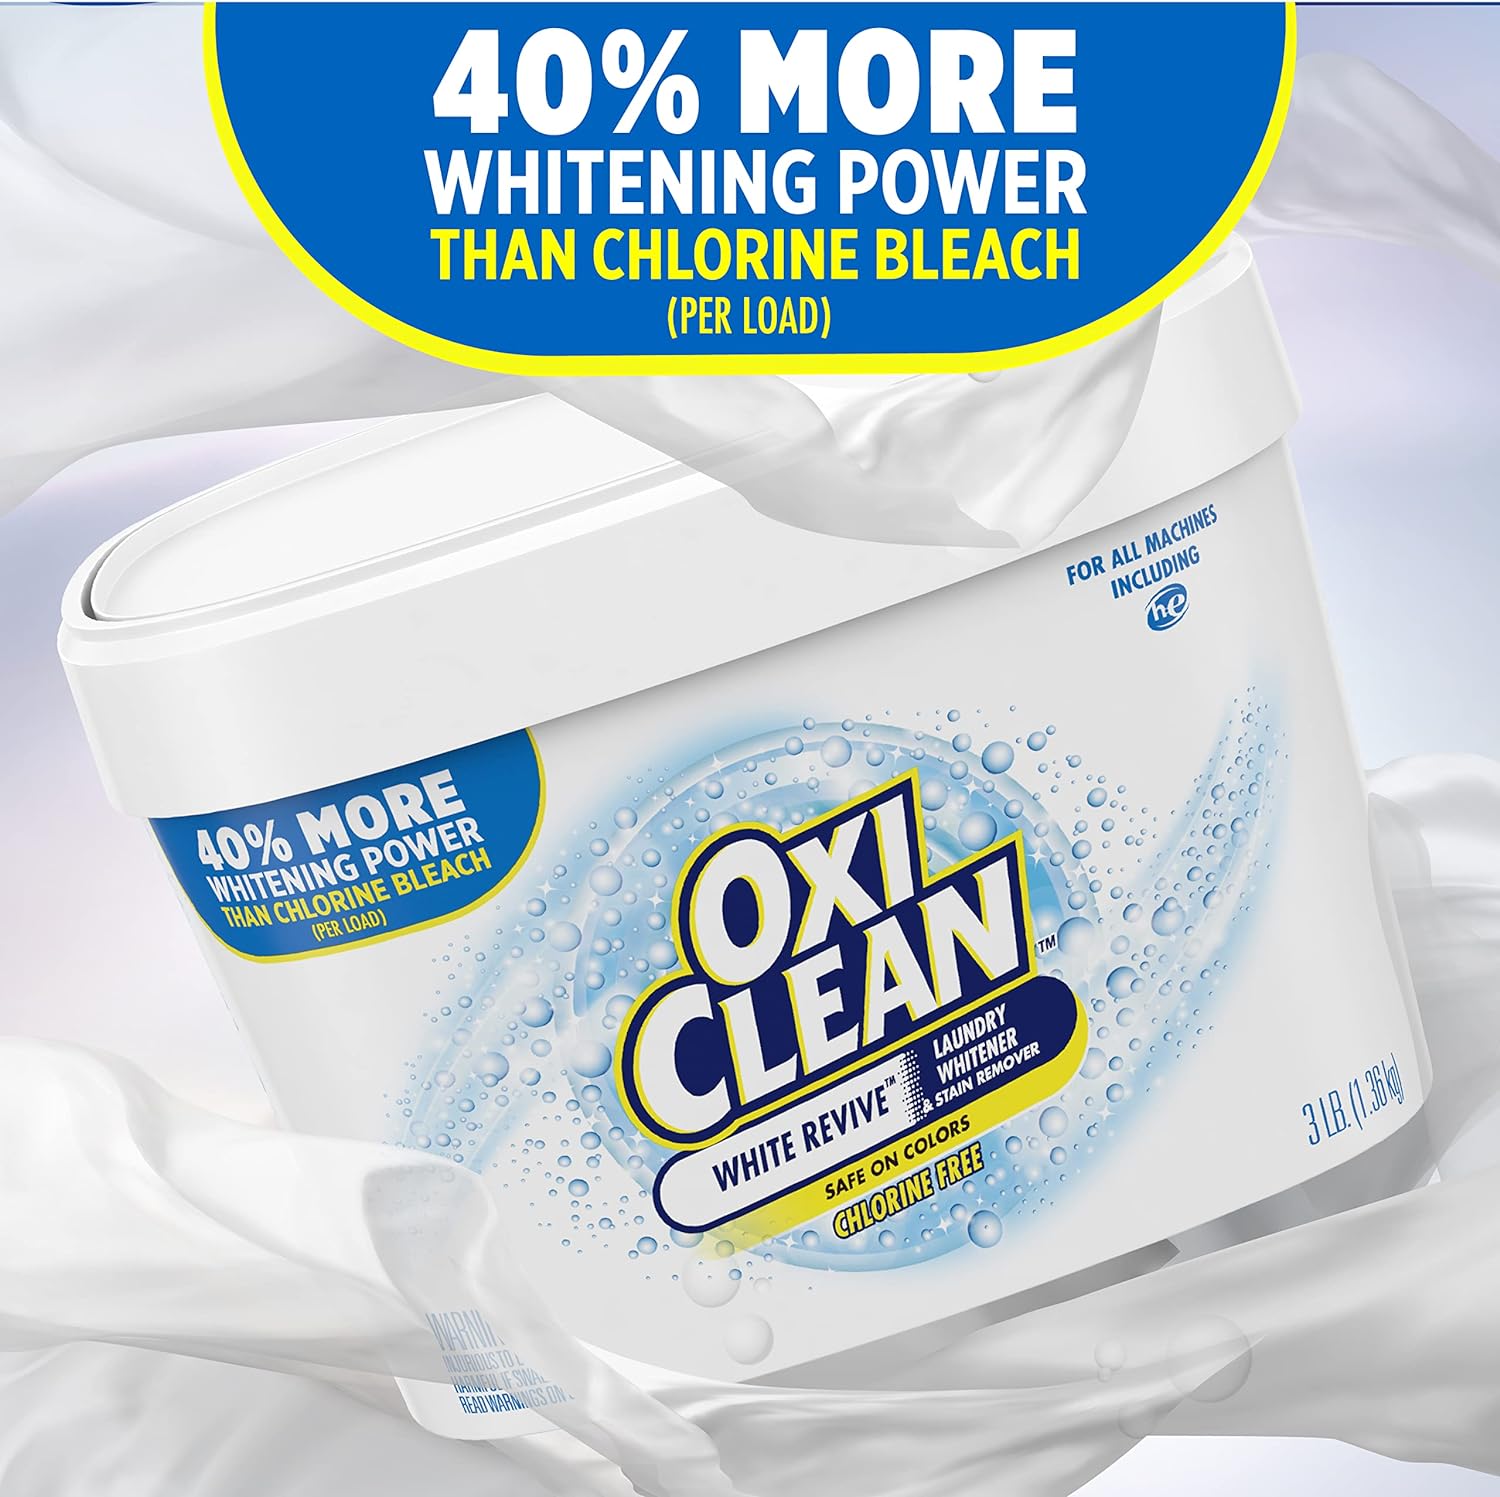 OxiClean White Revive Laundry Whitener + Stain Remover, 3 lbs : Health & Household